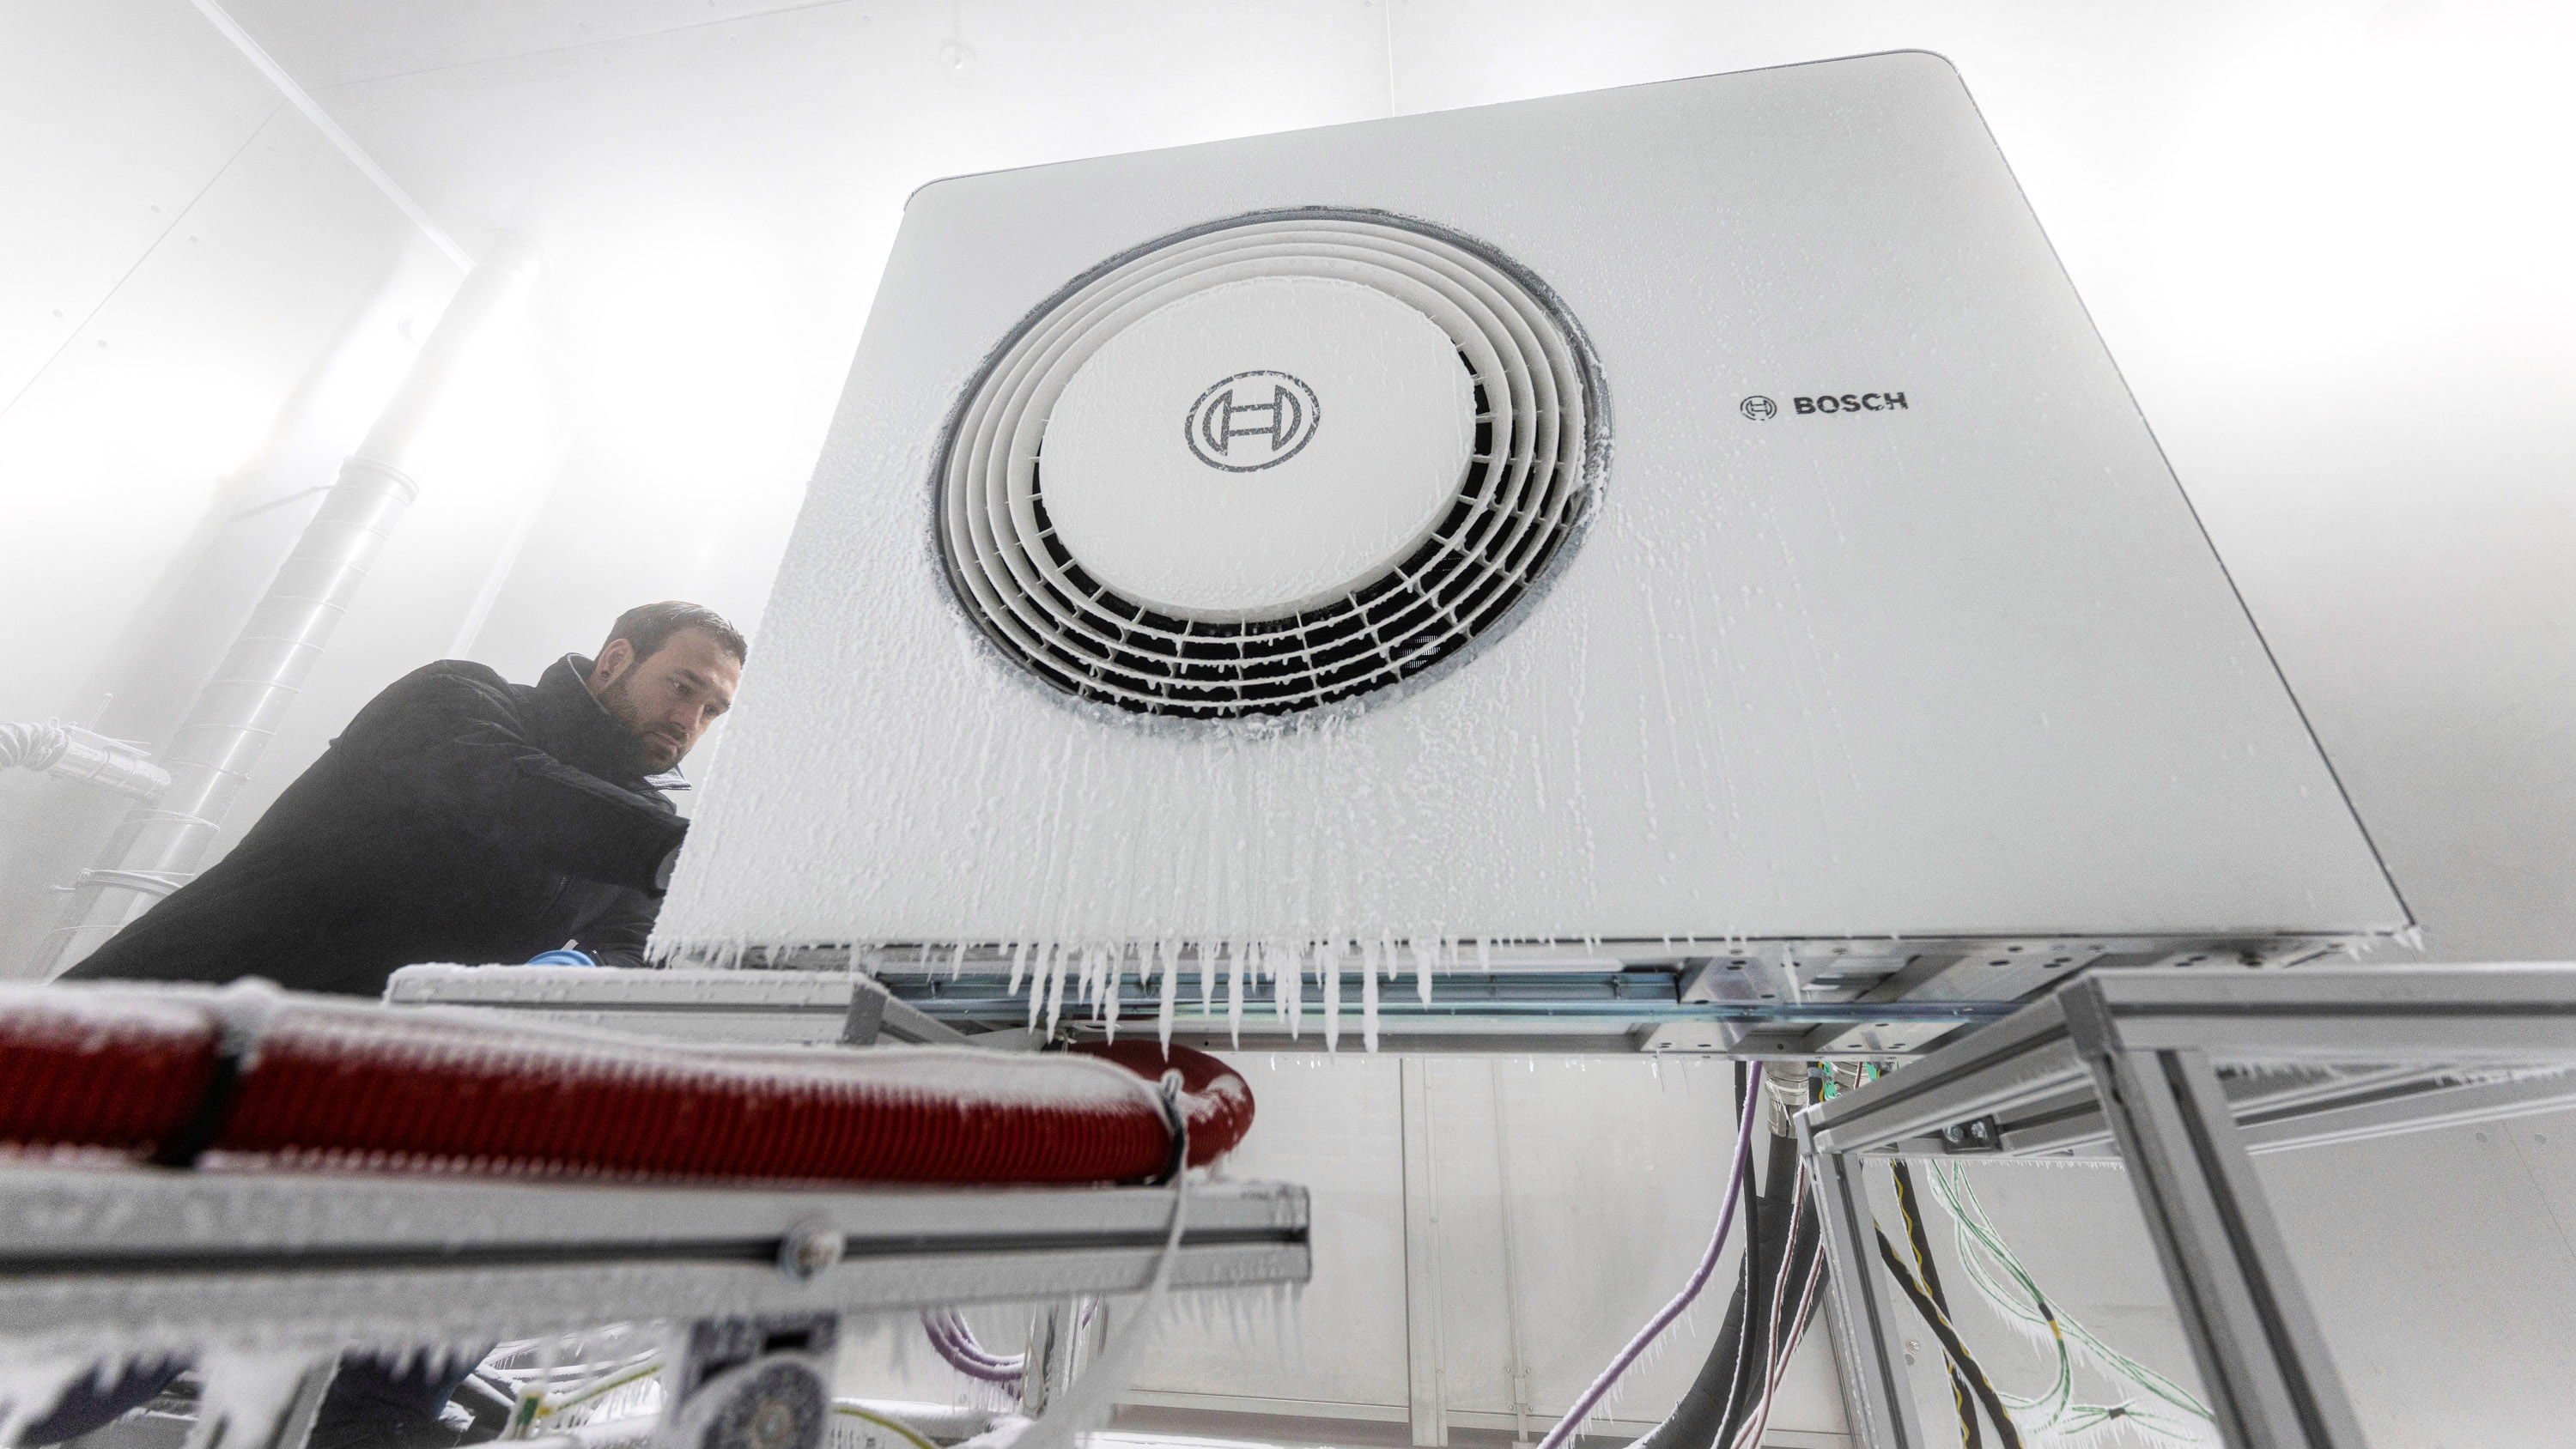 Bosch employee opening the housing of a heat pump in a cold chamber